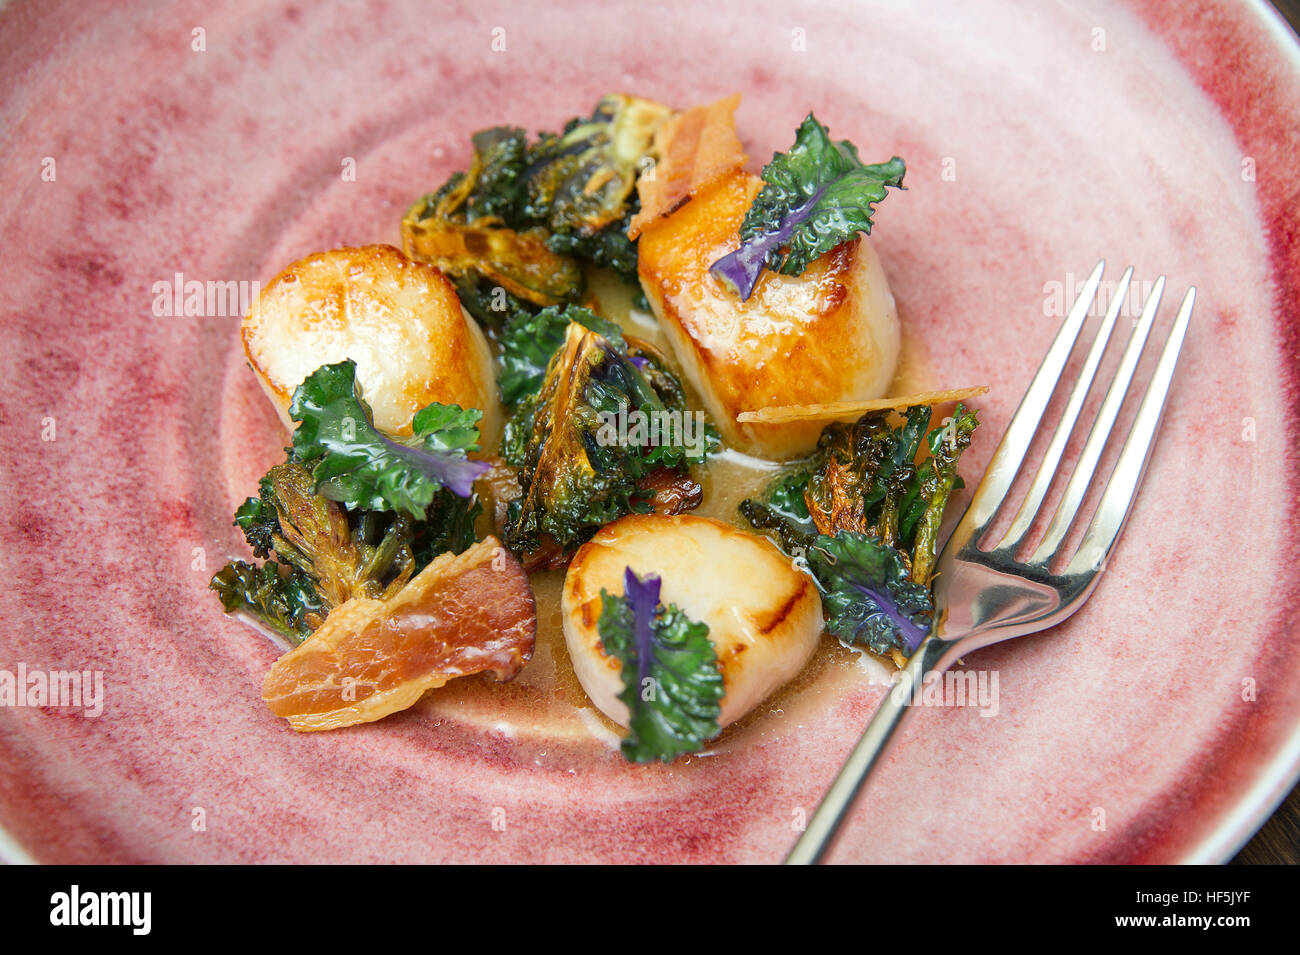 Kalettes being prepared, cooked and served in a scallop dish Stock Photo